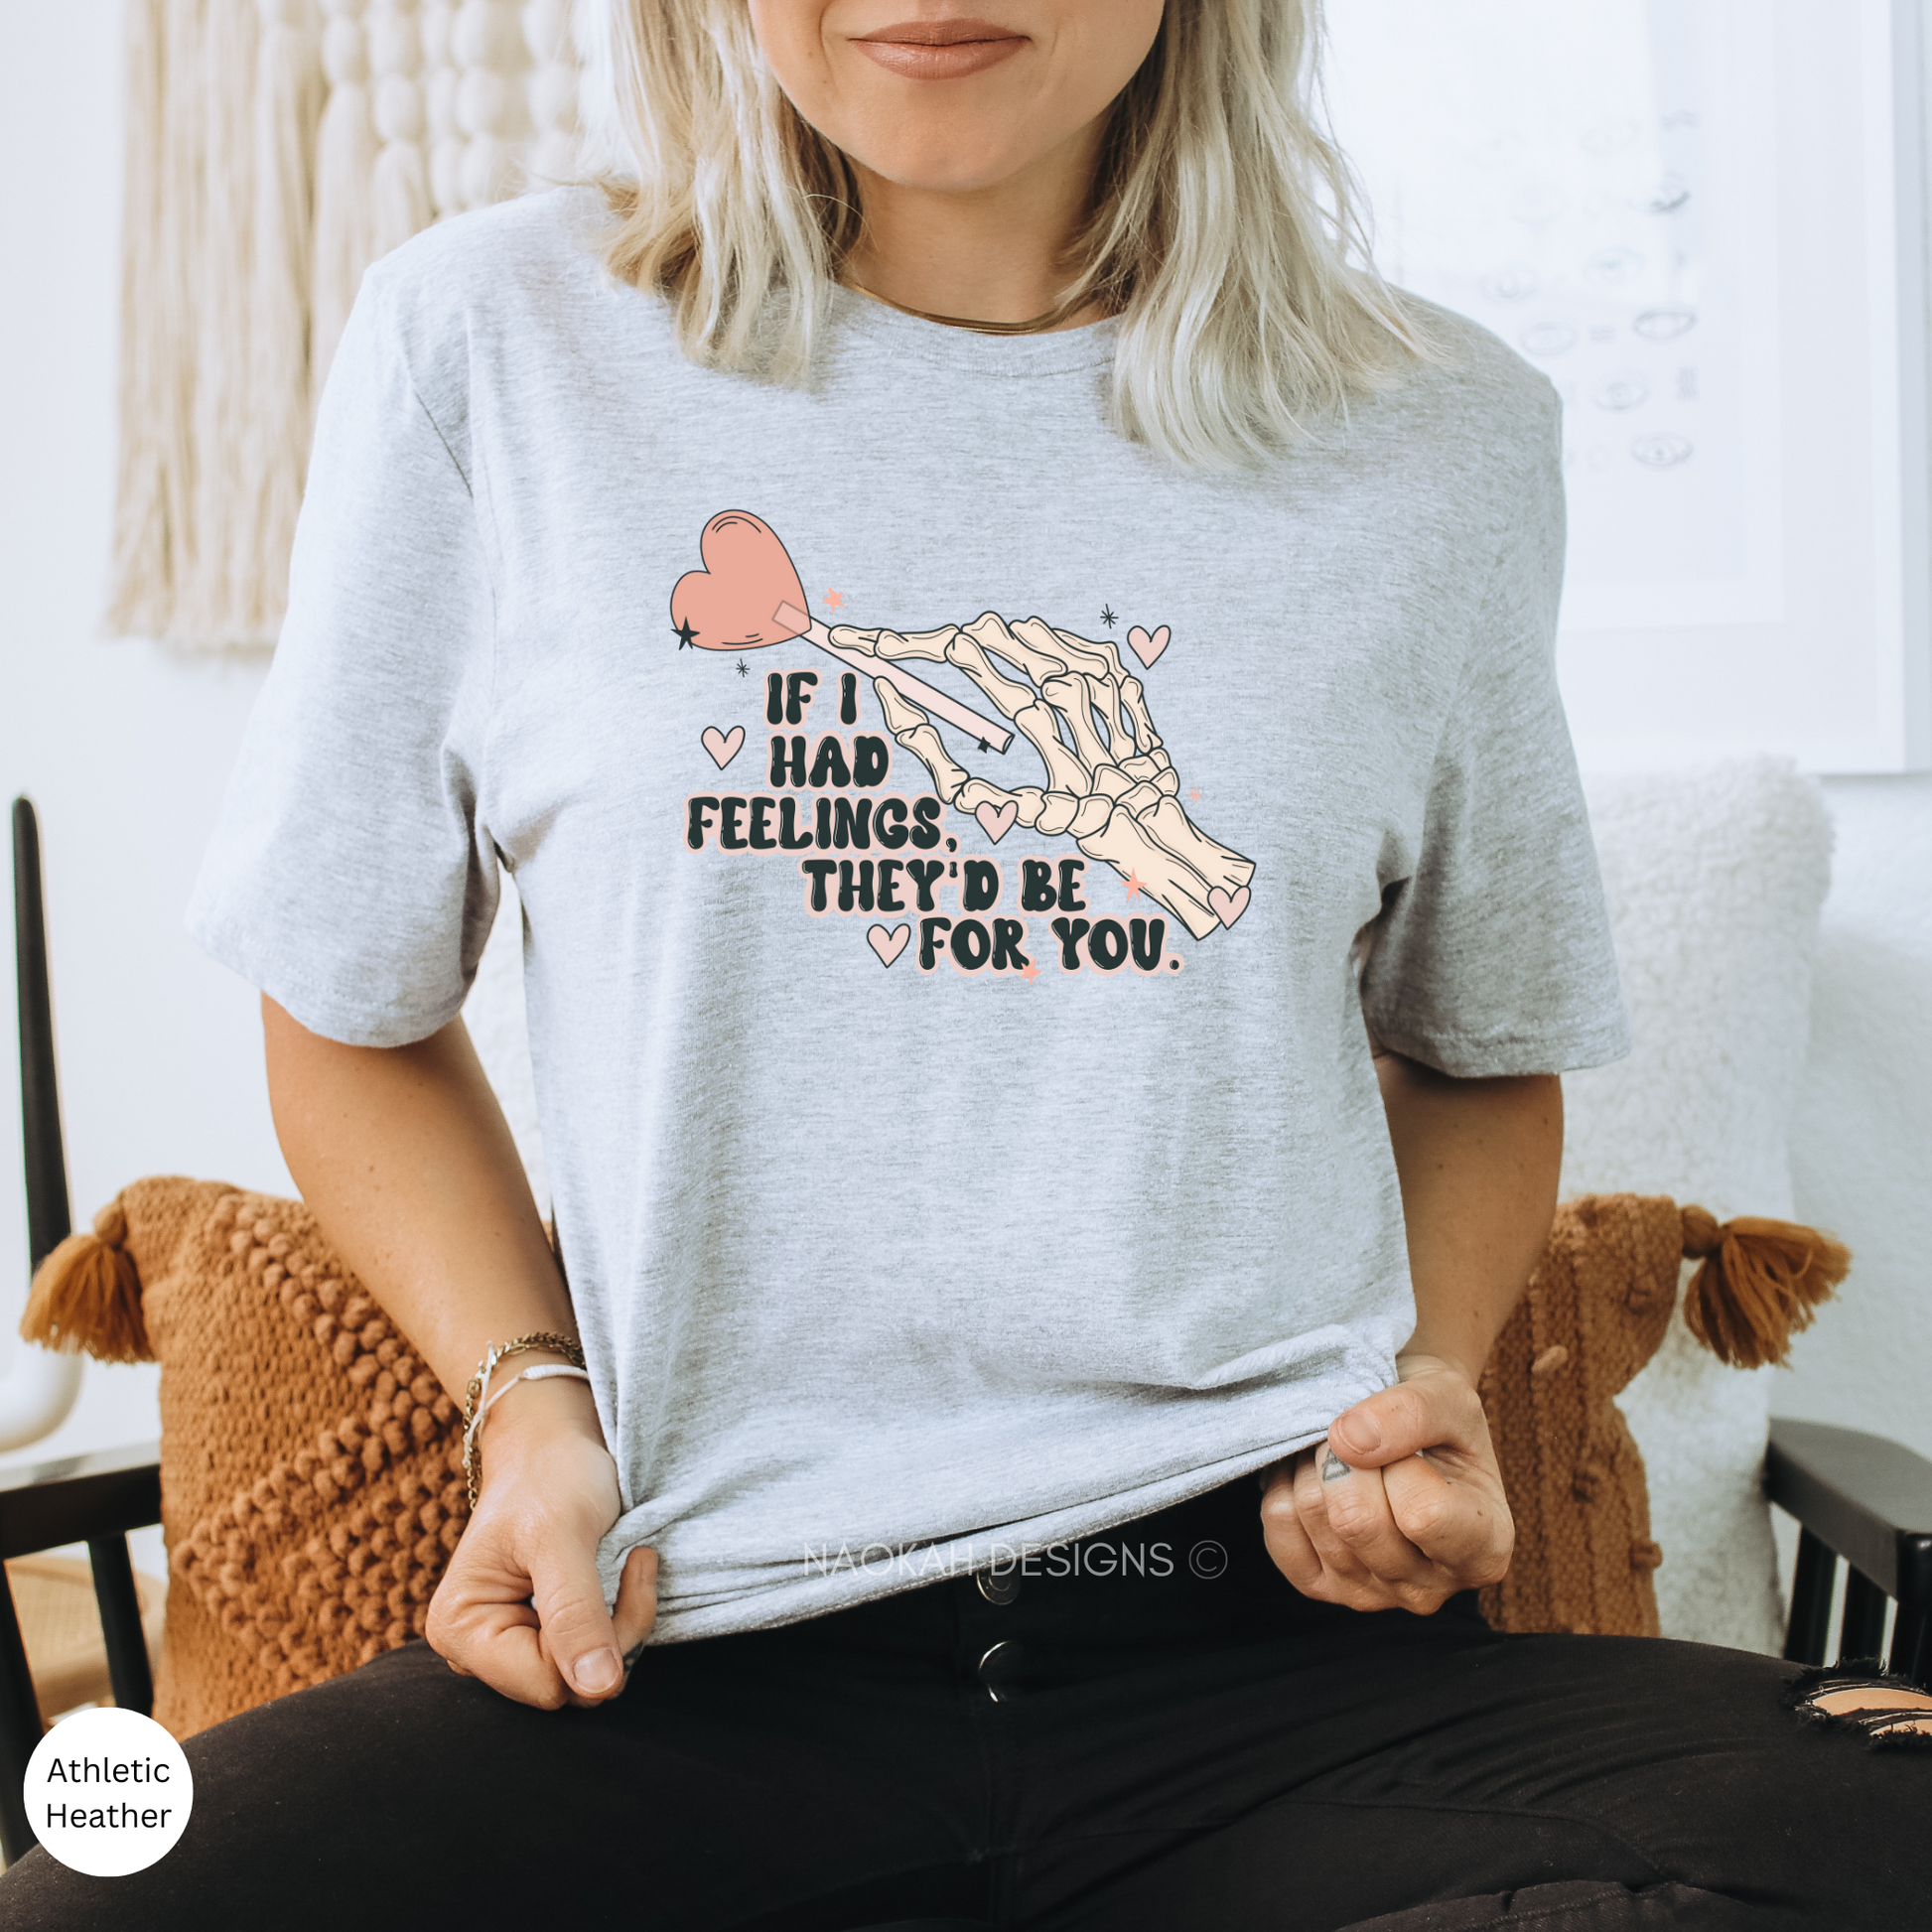 If I Had Feelings They’d Be For You Shirt, Love Shirt, Valentine Day Gift Shirt, Funny Valentine's Day, Skeleton Valentine Tee, Heart Shirt